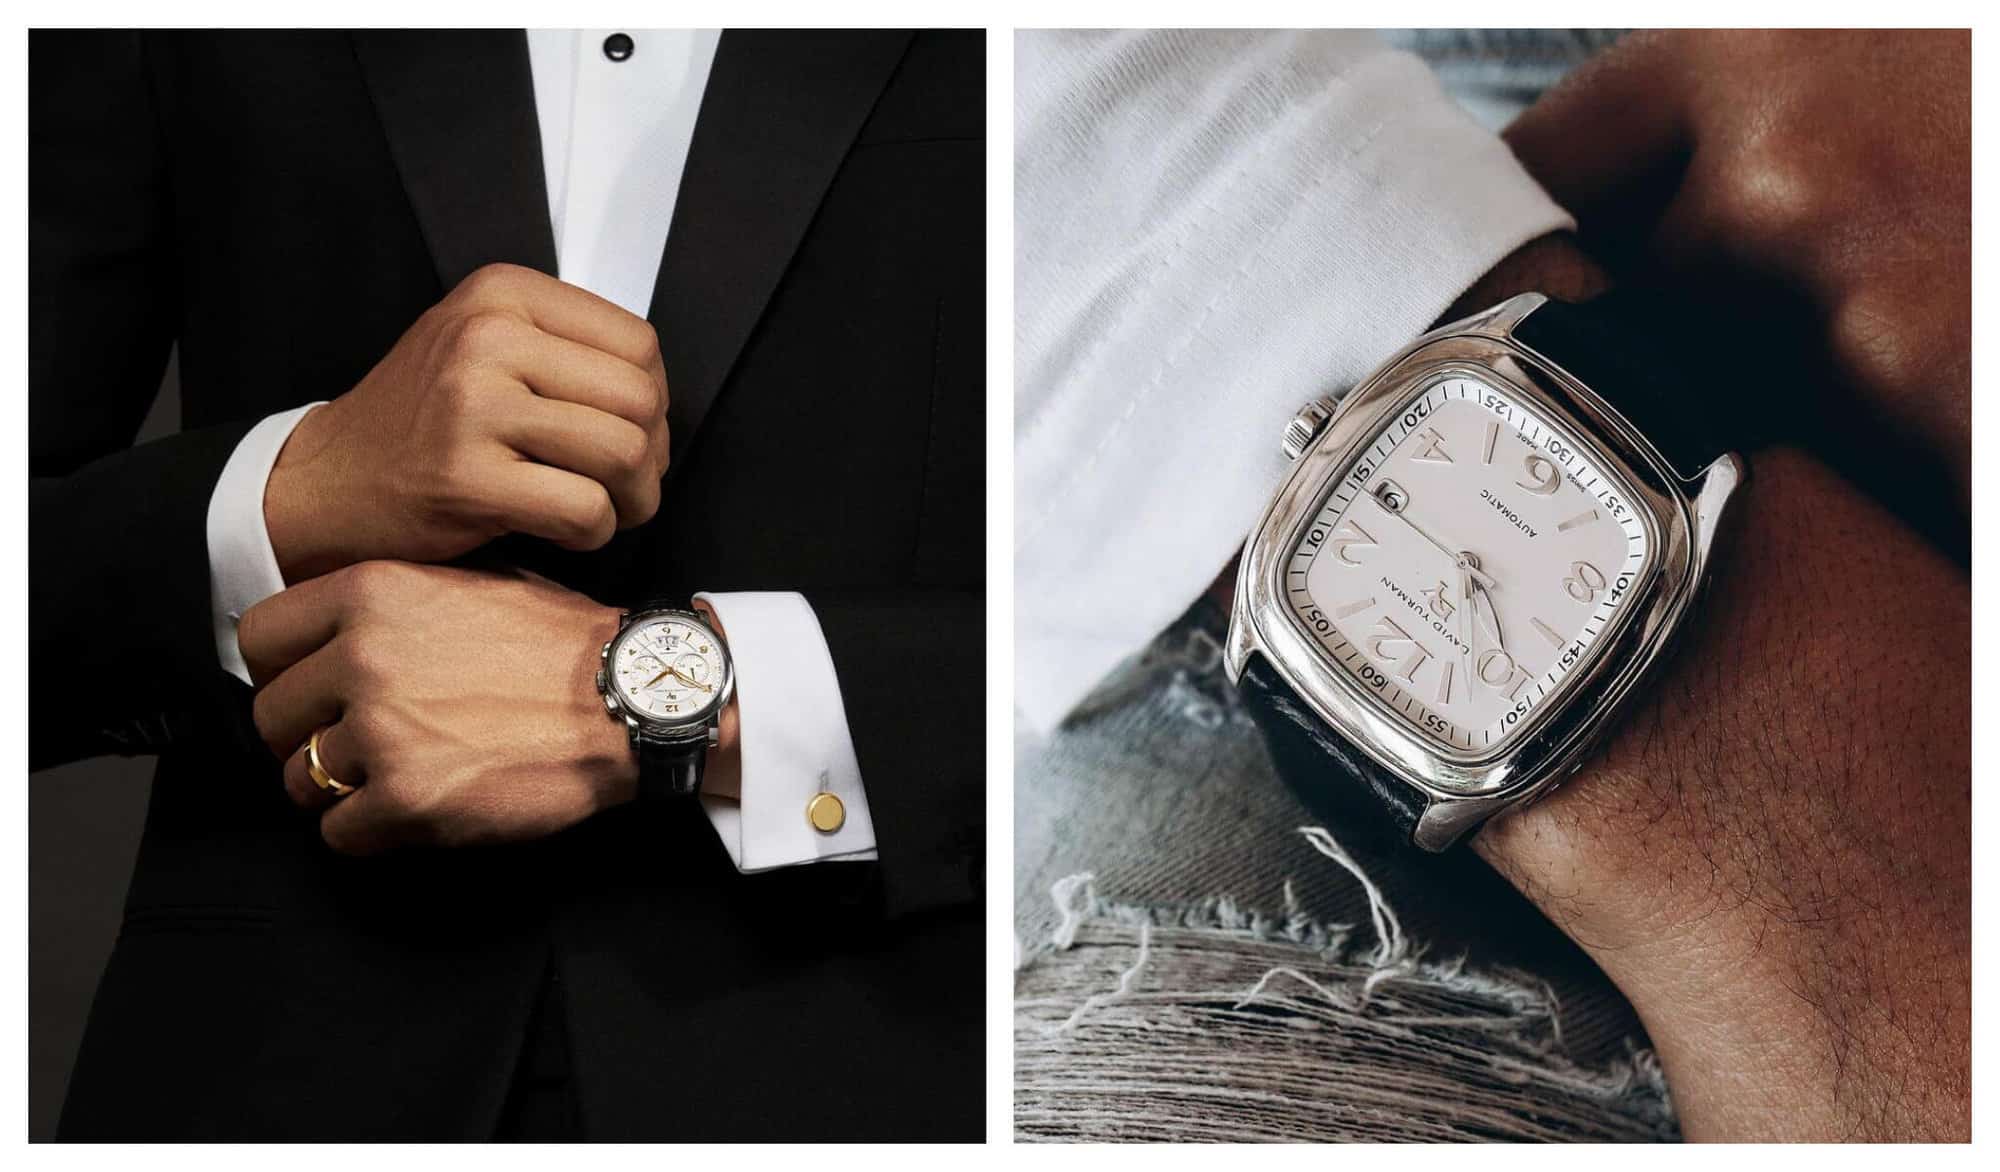 Right: A man in a tuxedo suit clips his cuffs and is wearing a watch. Right: A close up of a wrist watch with silver details and black leather straps.